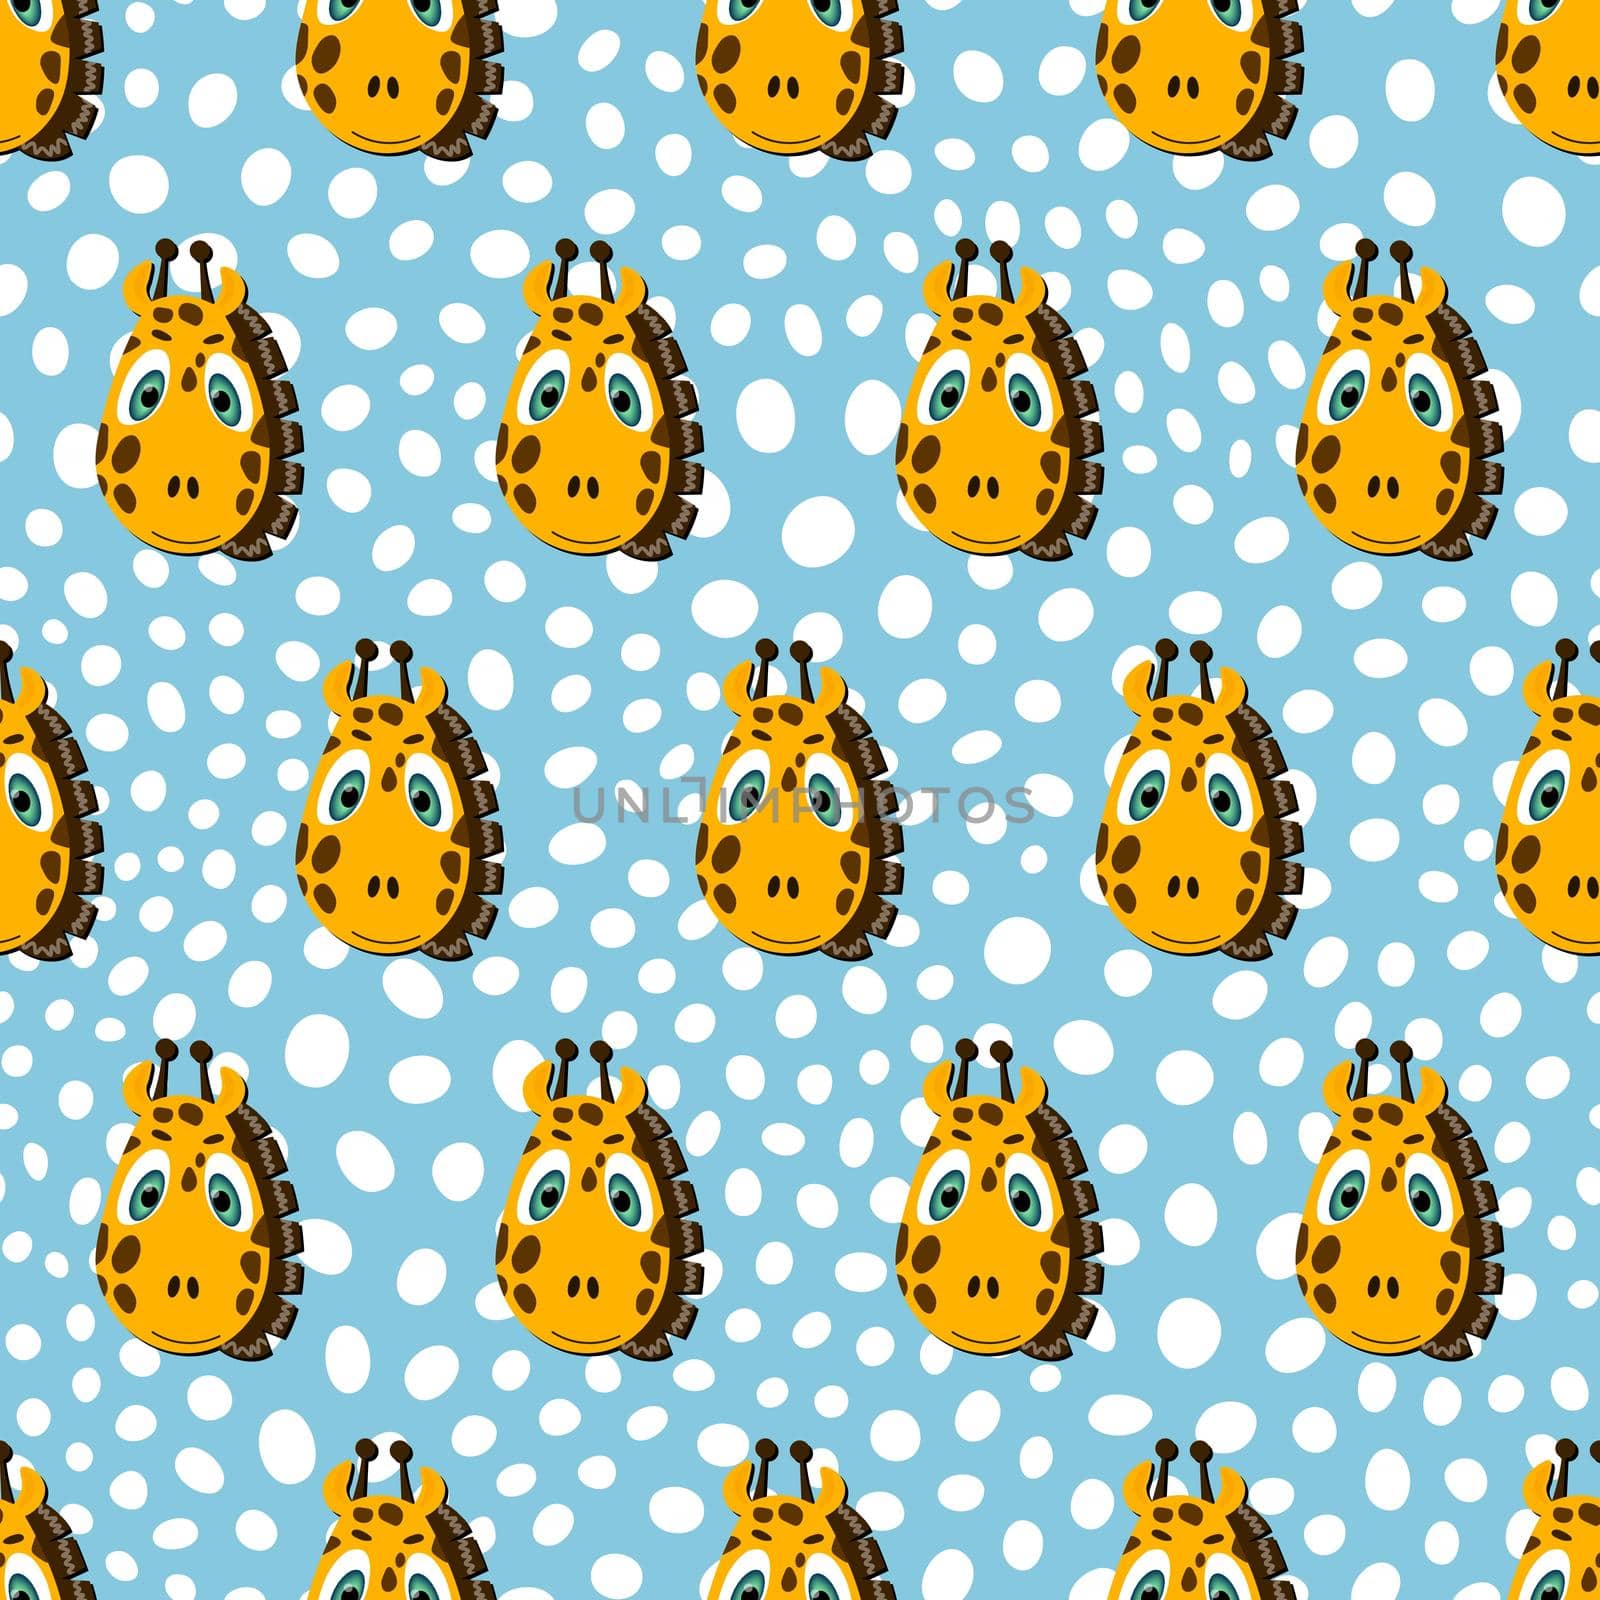 Vector flat animals colorful illustration for kids. Seamless pattern with cute giraffe face on blue polka dots background. Adorable cartoon character. Design for card, poster, fabric, textile. by allaku